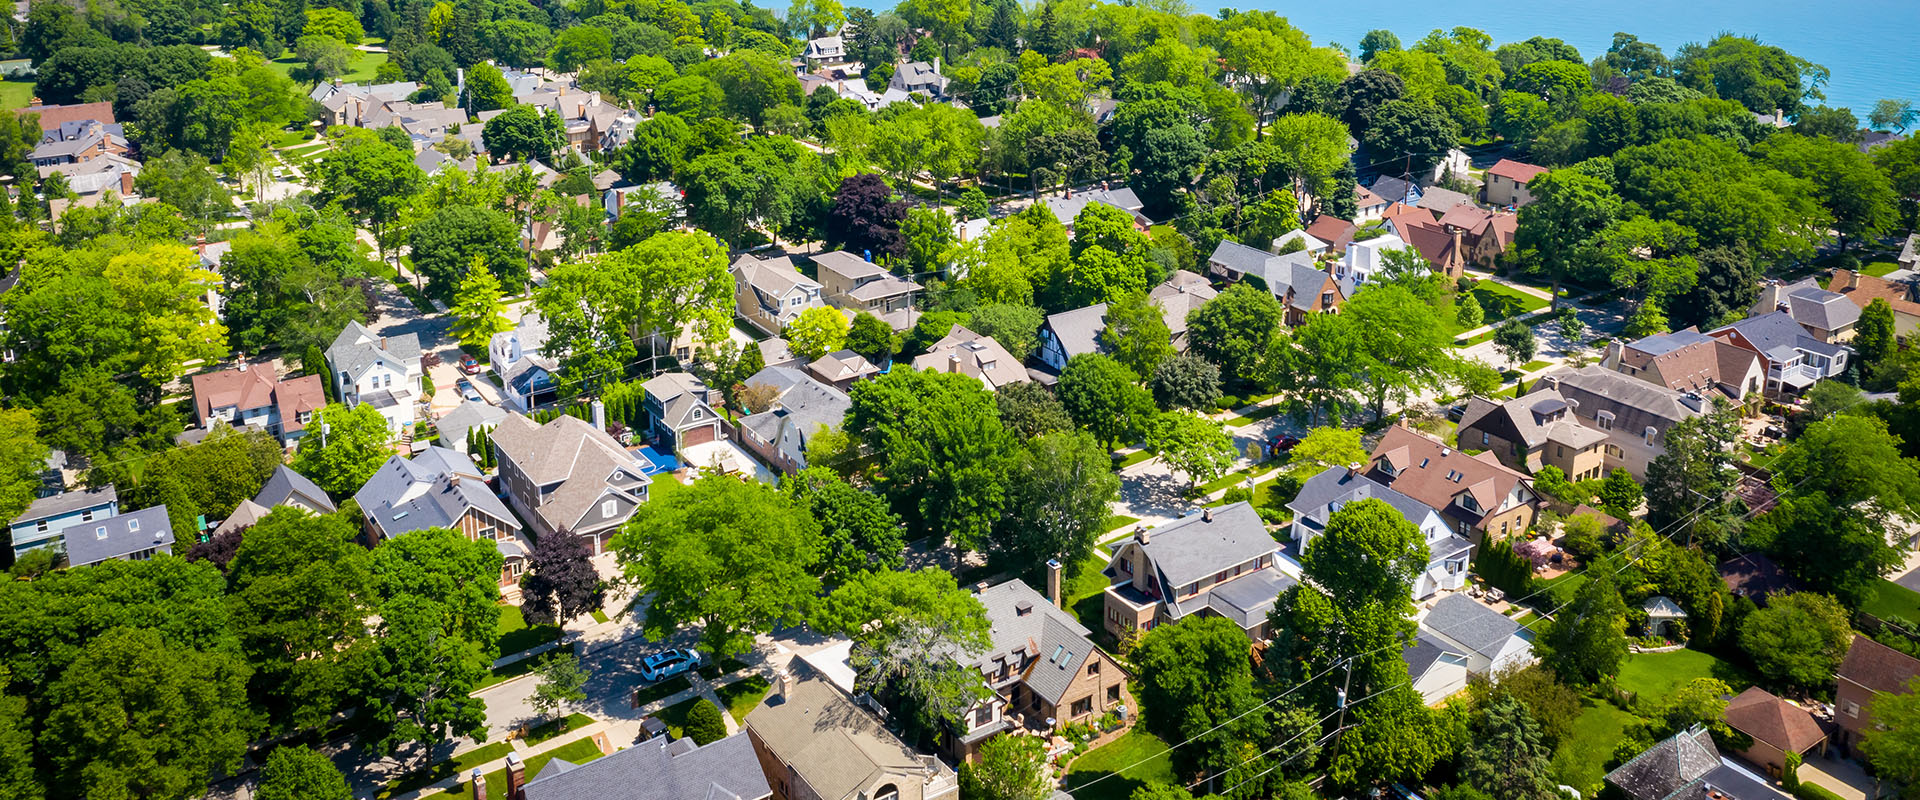 Aerial view of a Wisconsin residential neighborhood